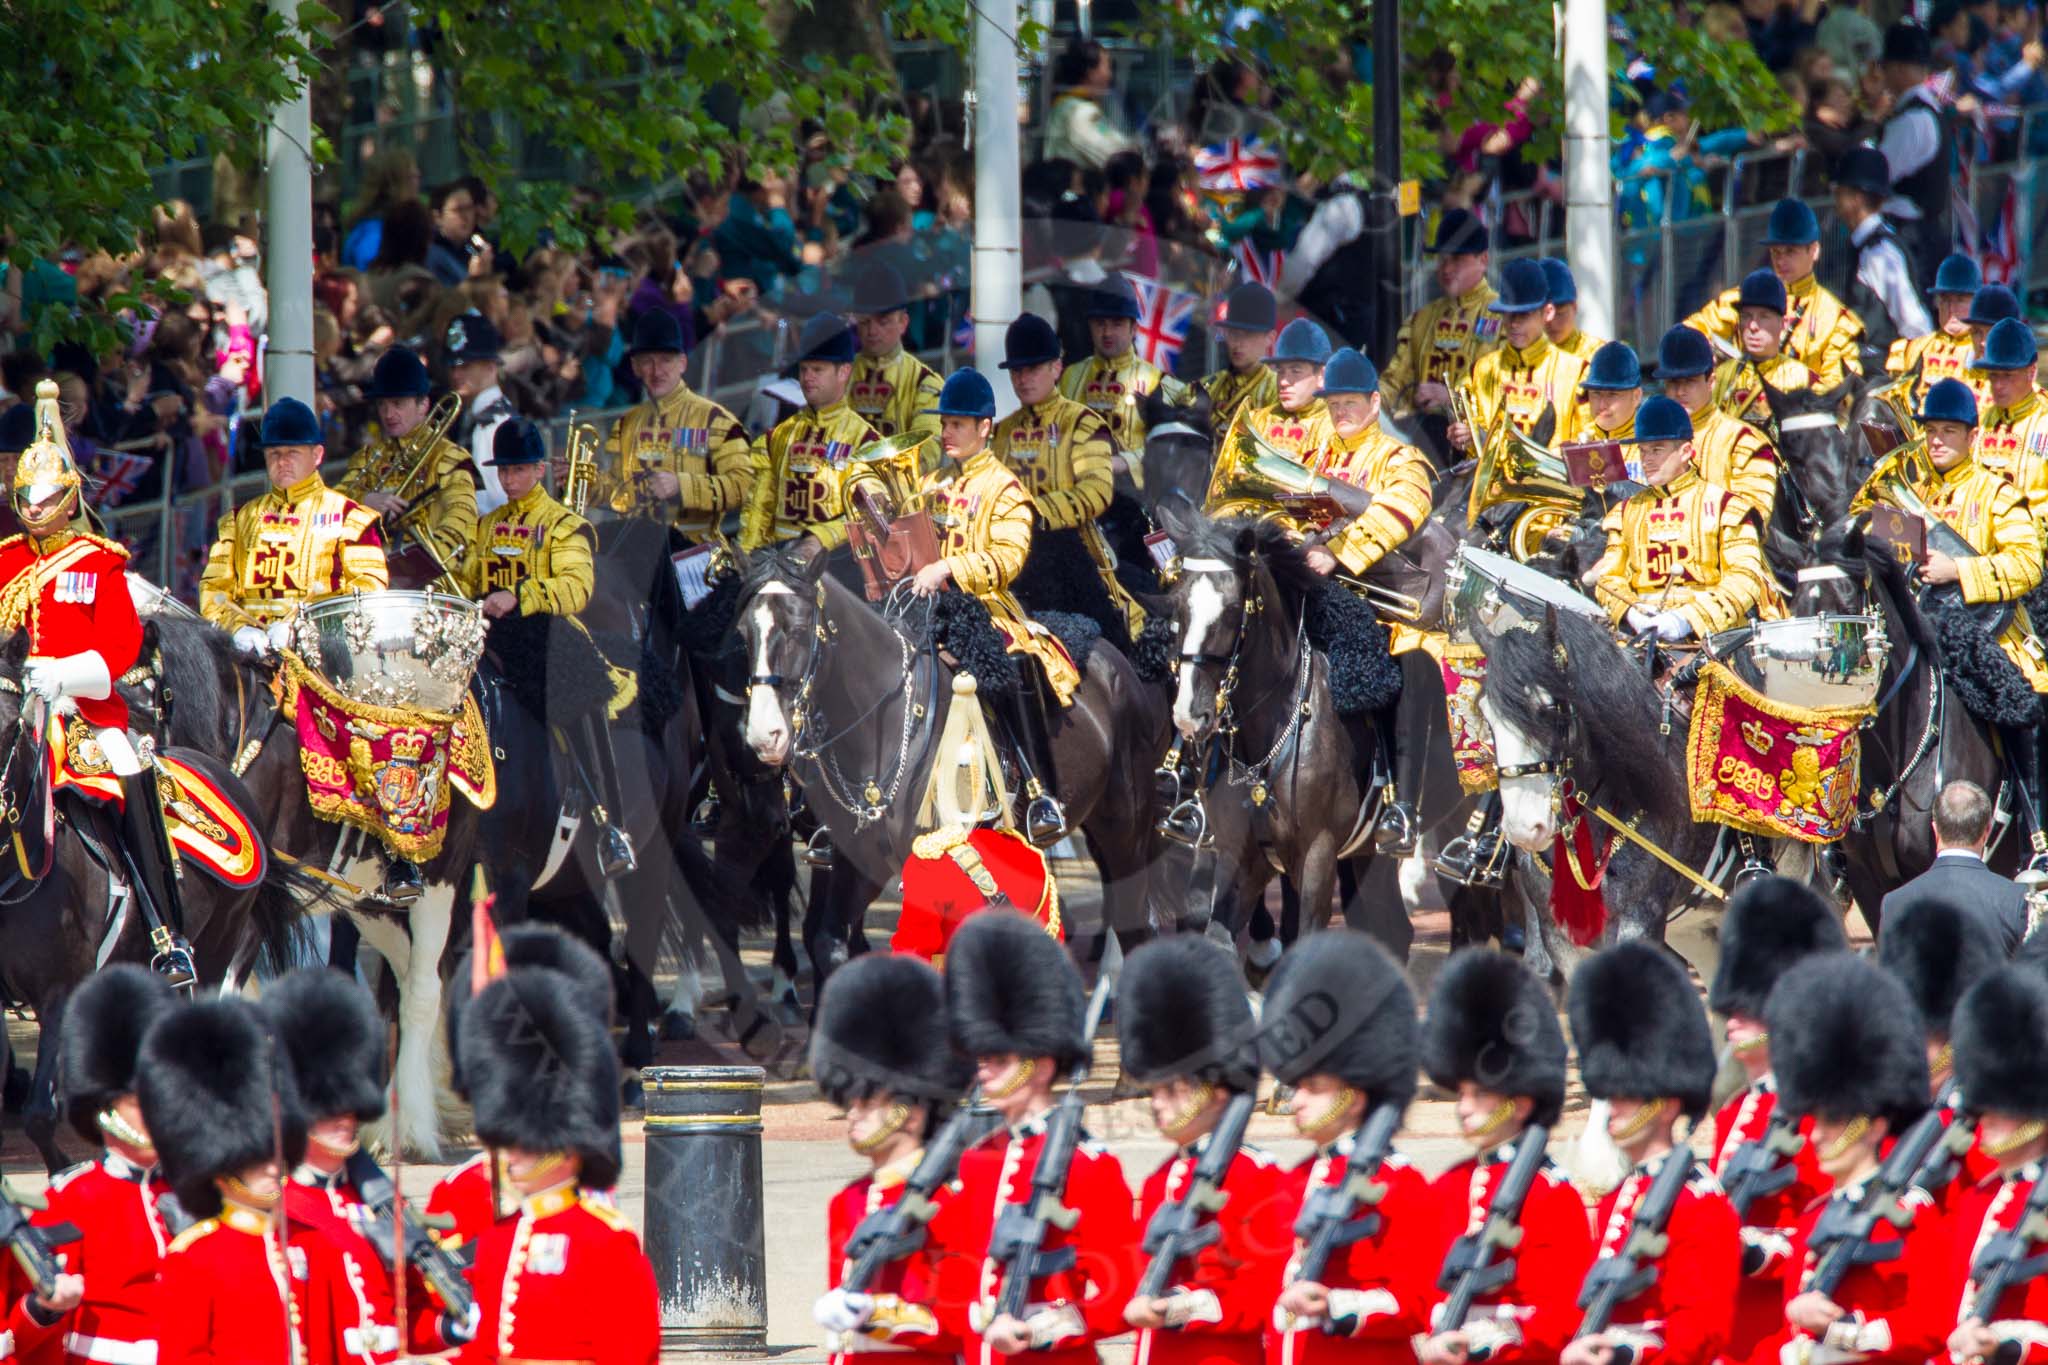 The Colonel's Review 2013: The Mounted Bands of the Household Cavalry are marching down Horse Guards Road as the third element of the Royal Procession..
Horse Guards Parade, Westminster,
London SW1,

United Kingdom,
on 08 June 2013 at 10:57, image #251